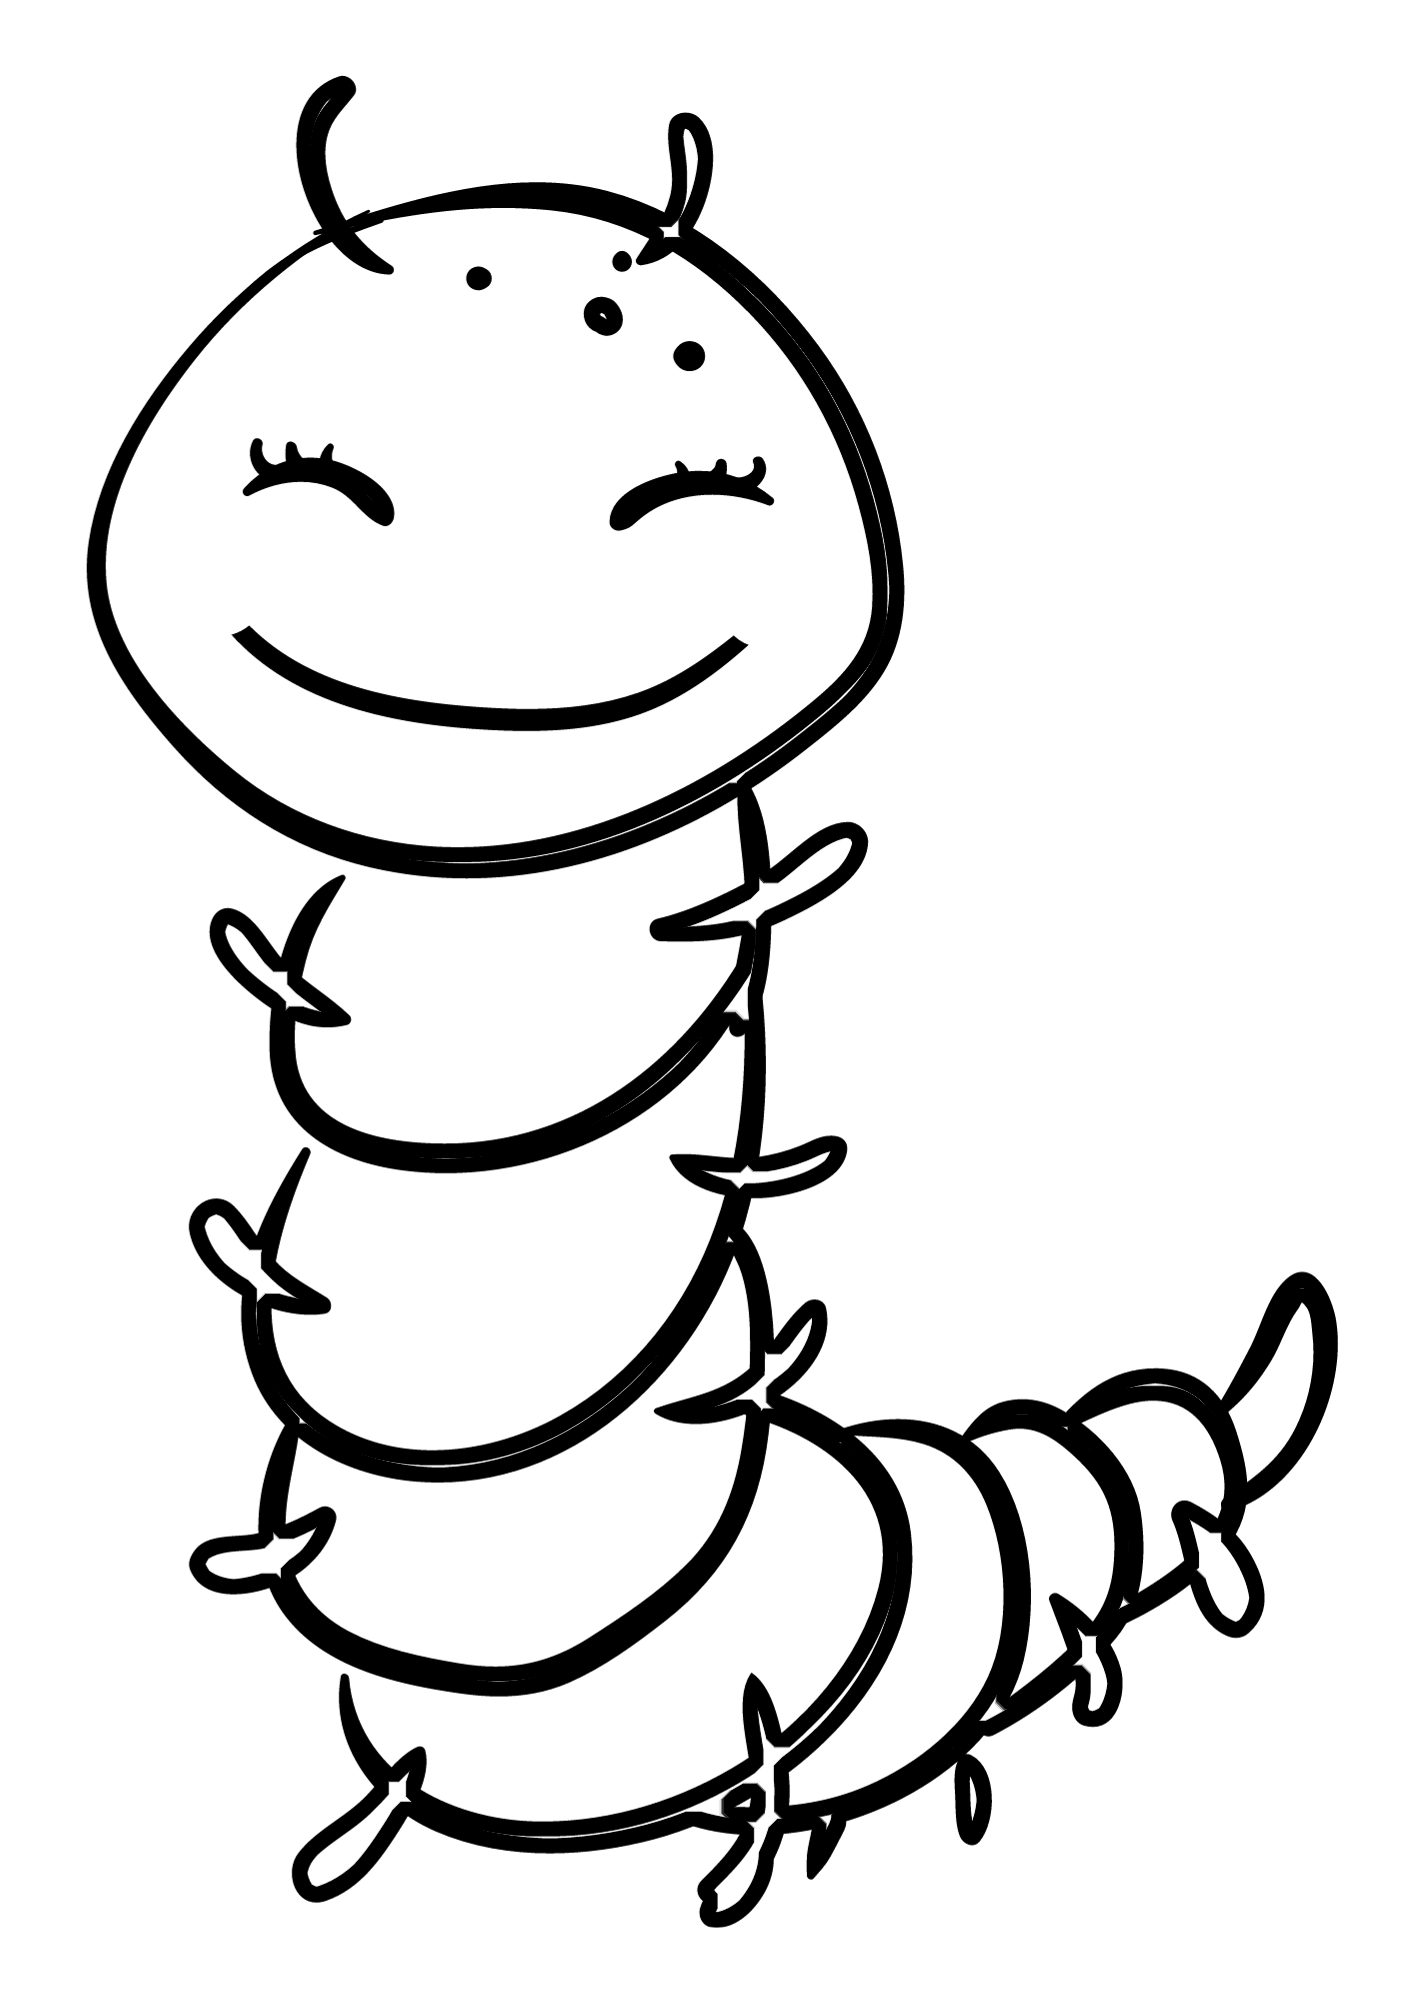 Centipede Free Coloring Page